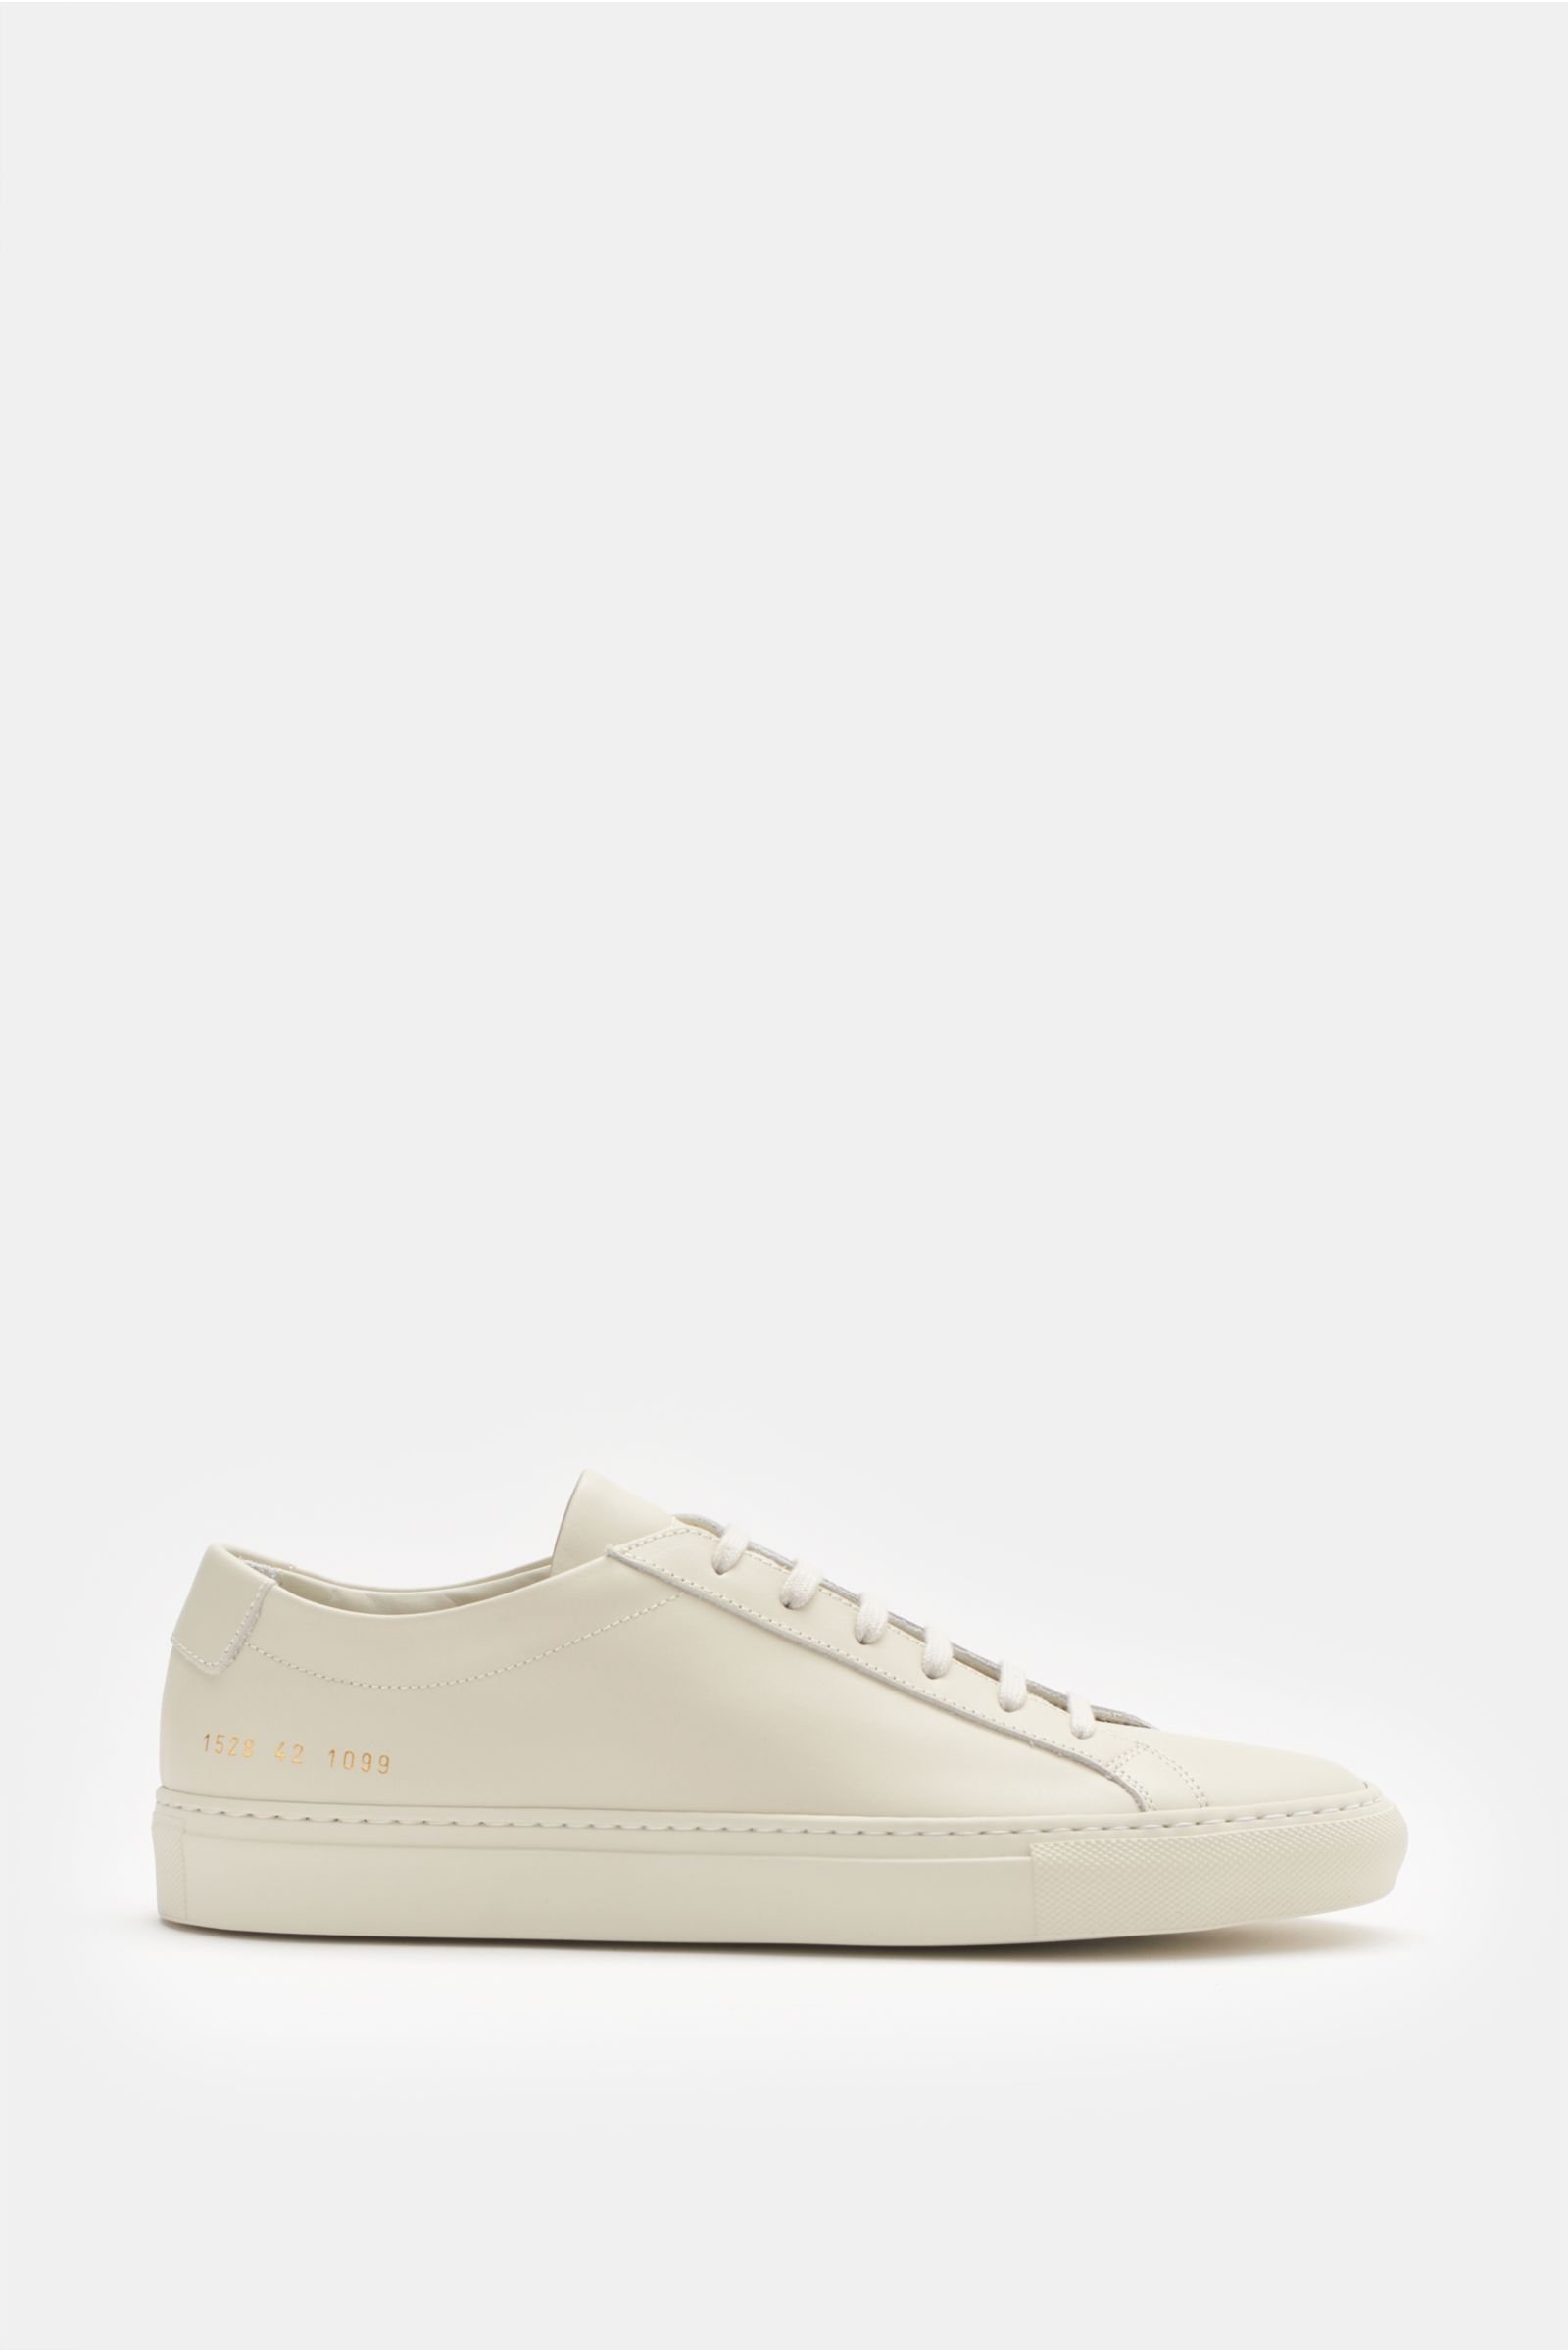 ‘Original Achilles’ sneakers in beige by COMMON PROJECTS | BRAUN Hamburg